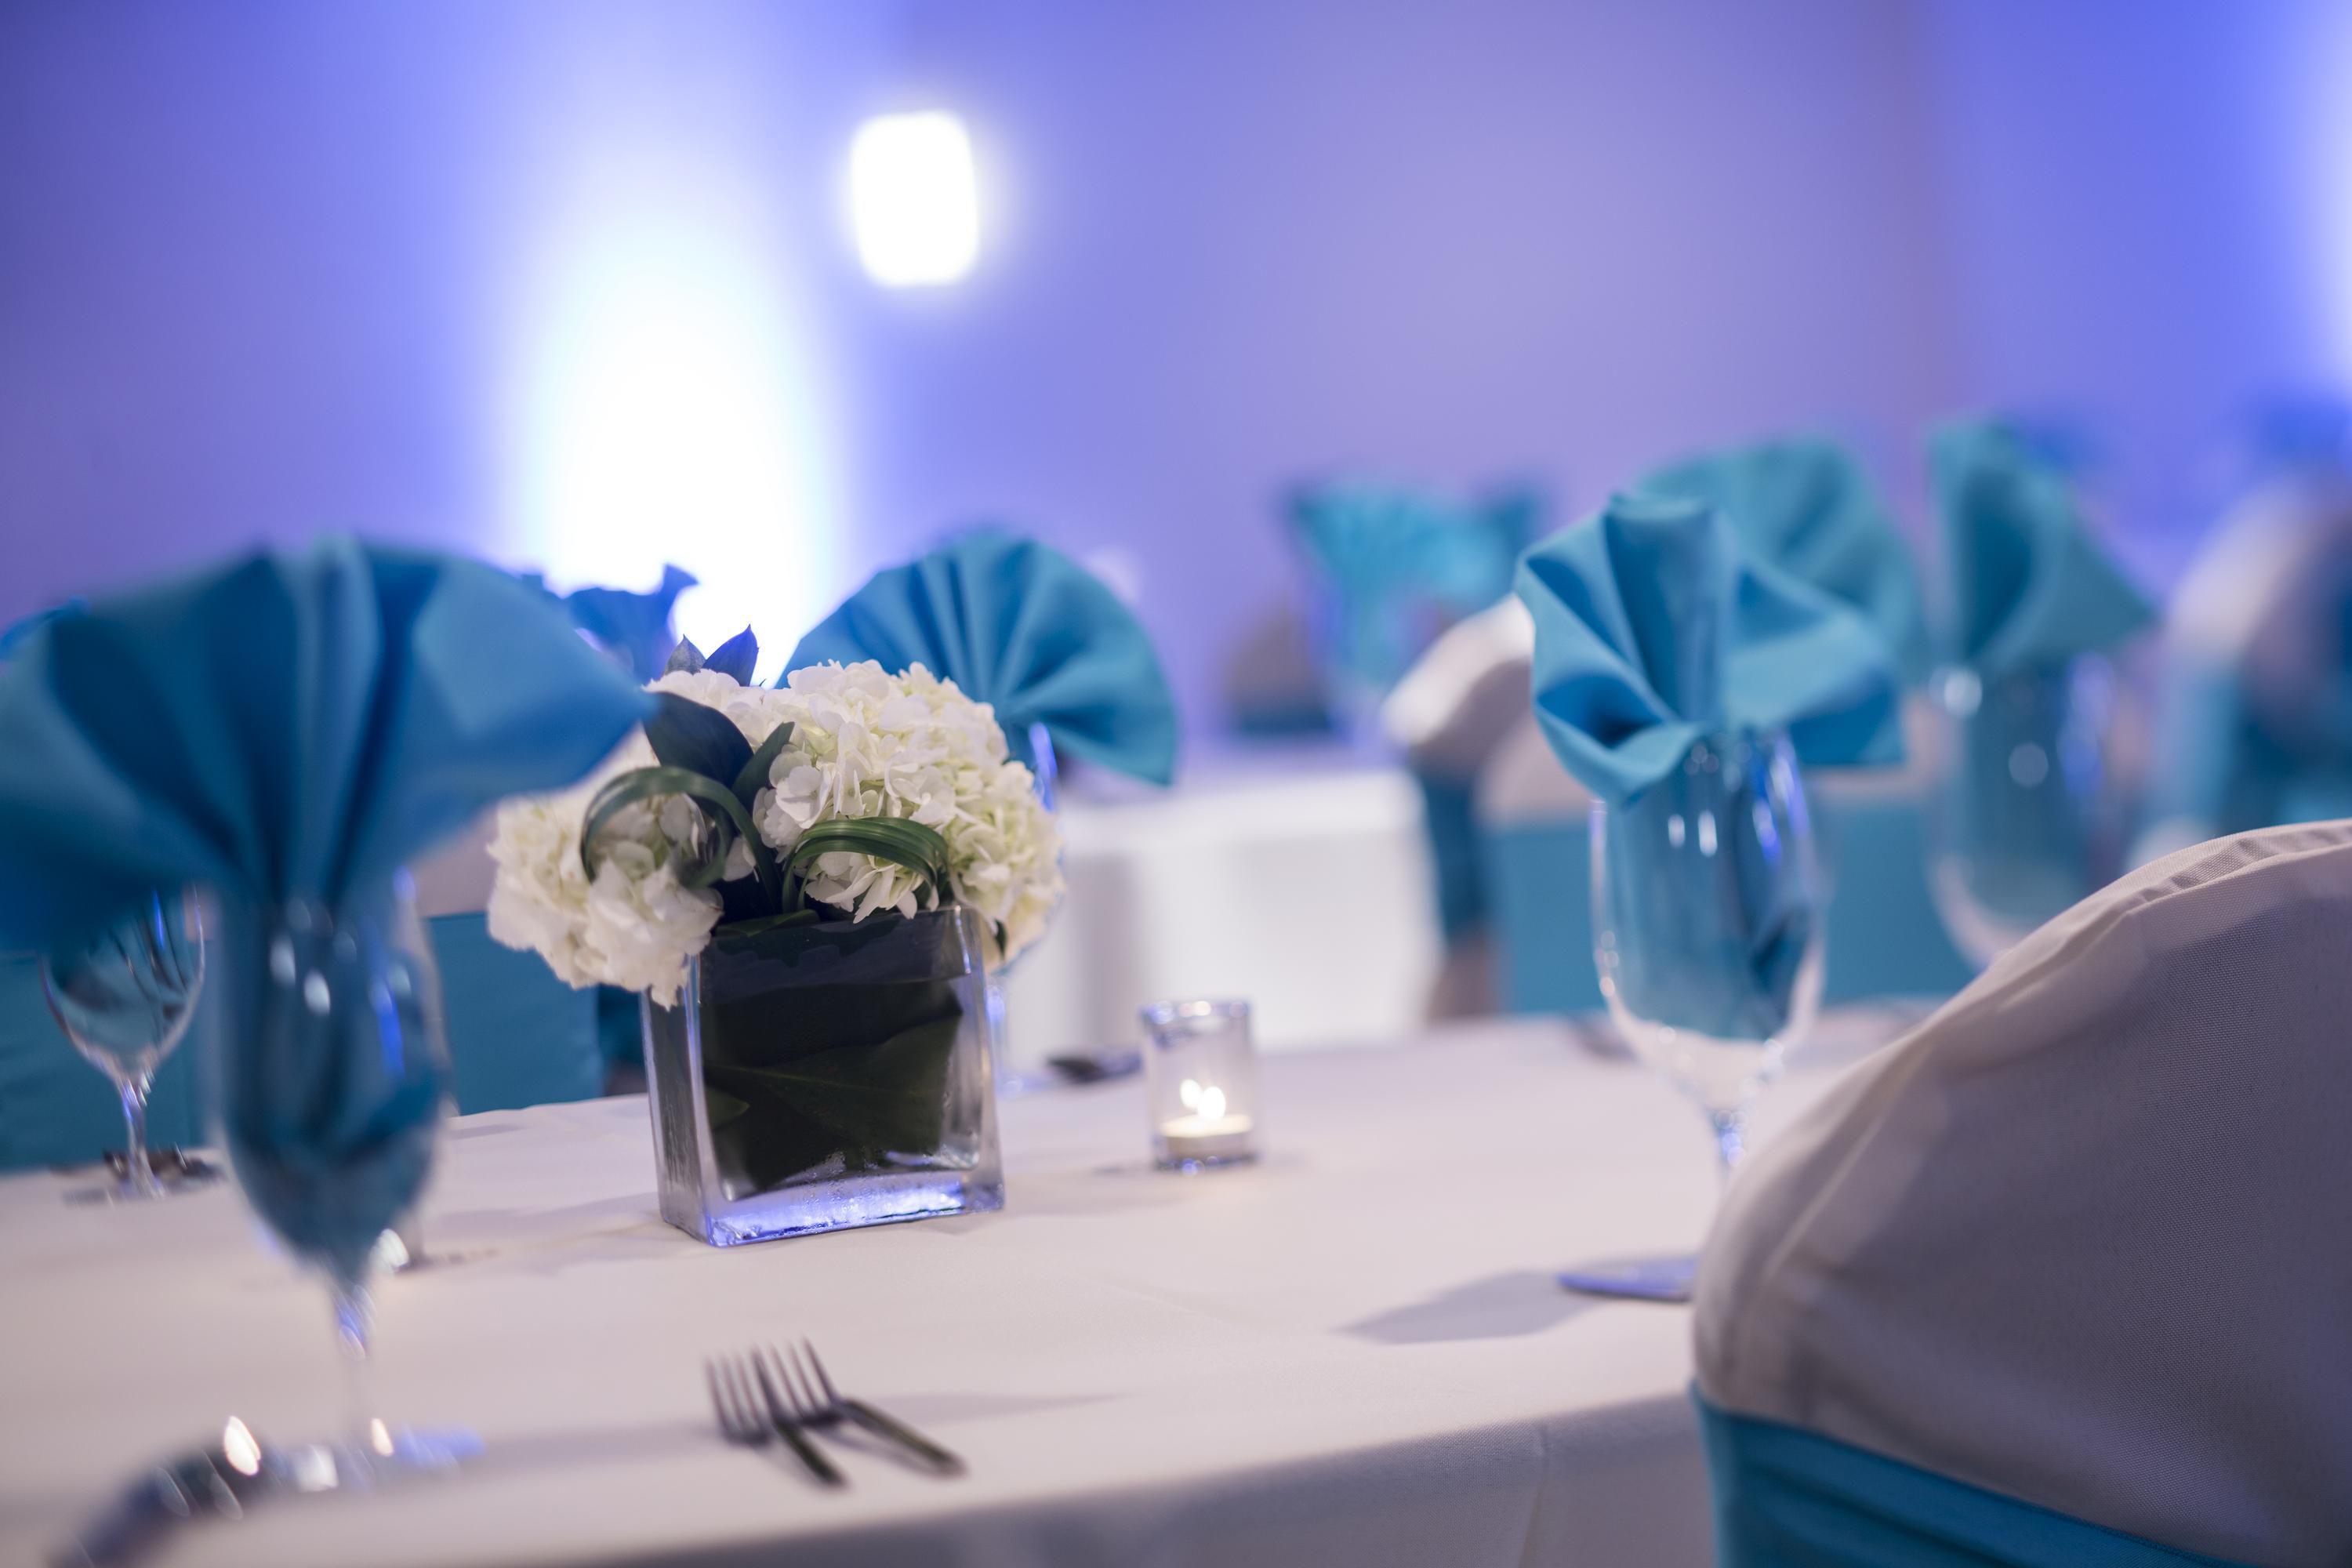 Host your Memphis wedding reception at our downtown hotel